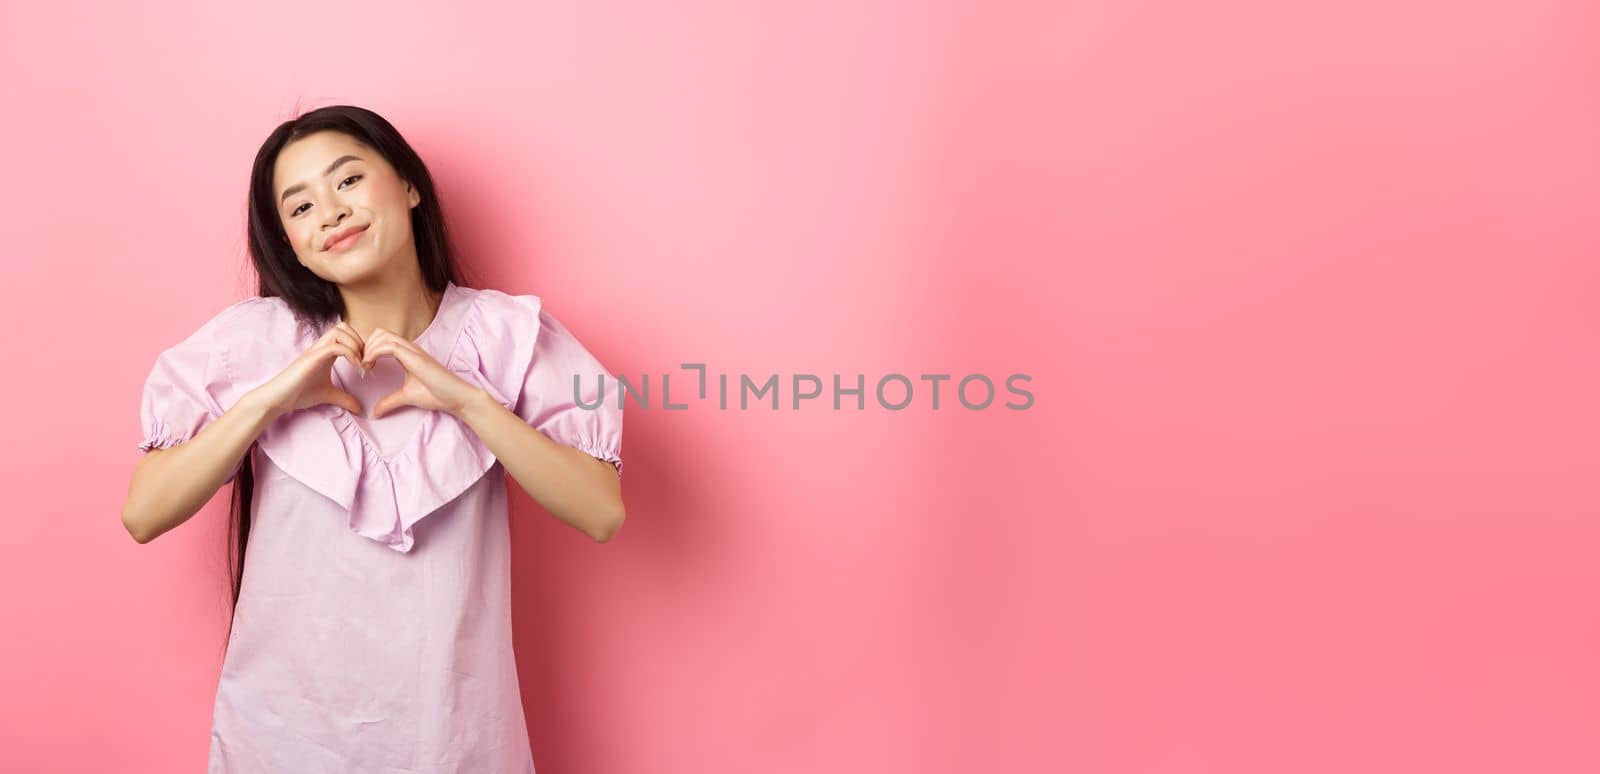 Valentines day concept. Beautiful korean teenager in dress showing heart gesture and smiling with admiration and affection, falling in love, feel romantic, pink background.